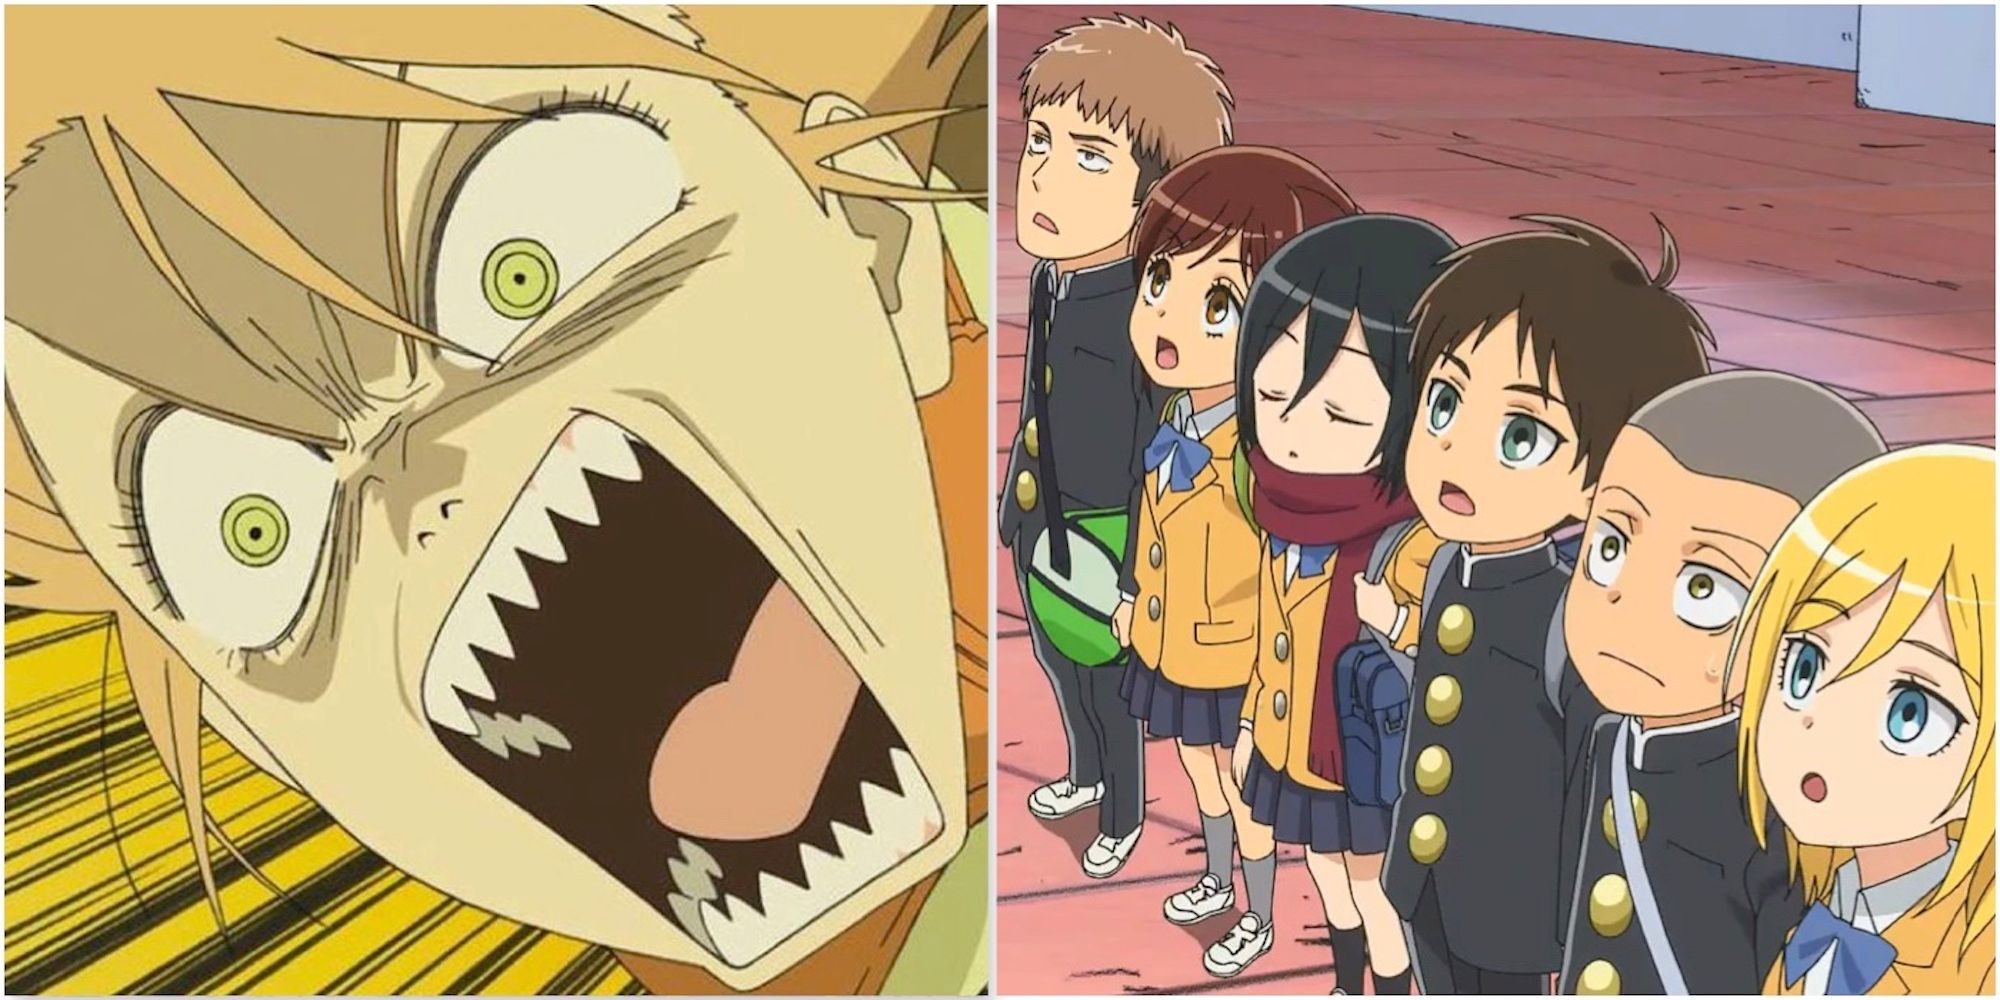 Haruko from FLCL and A scene featuring characters from Attack On Titan: Junior High